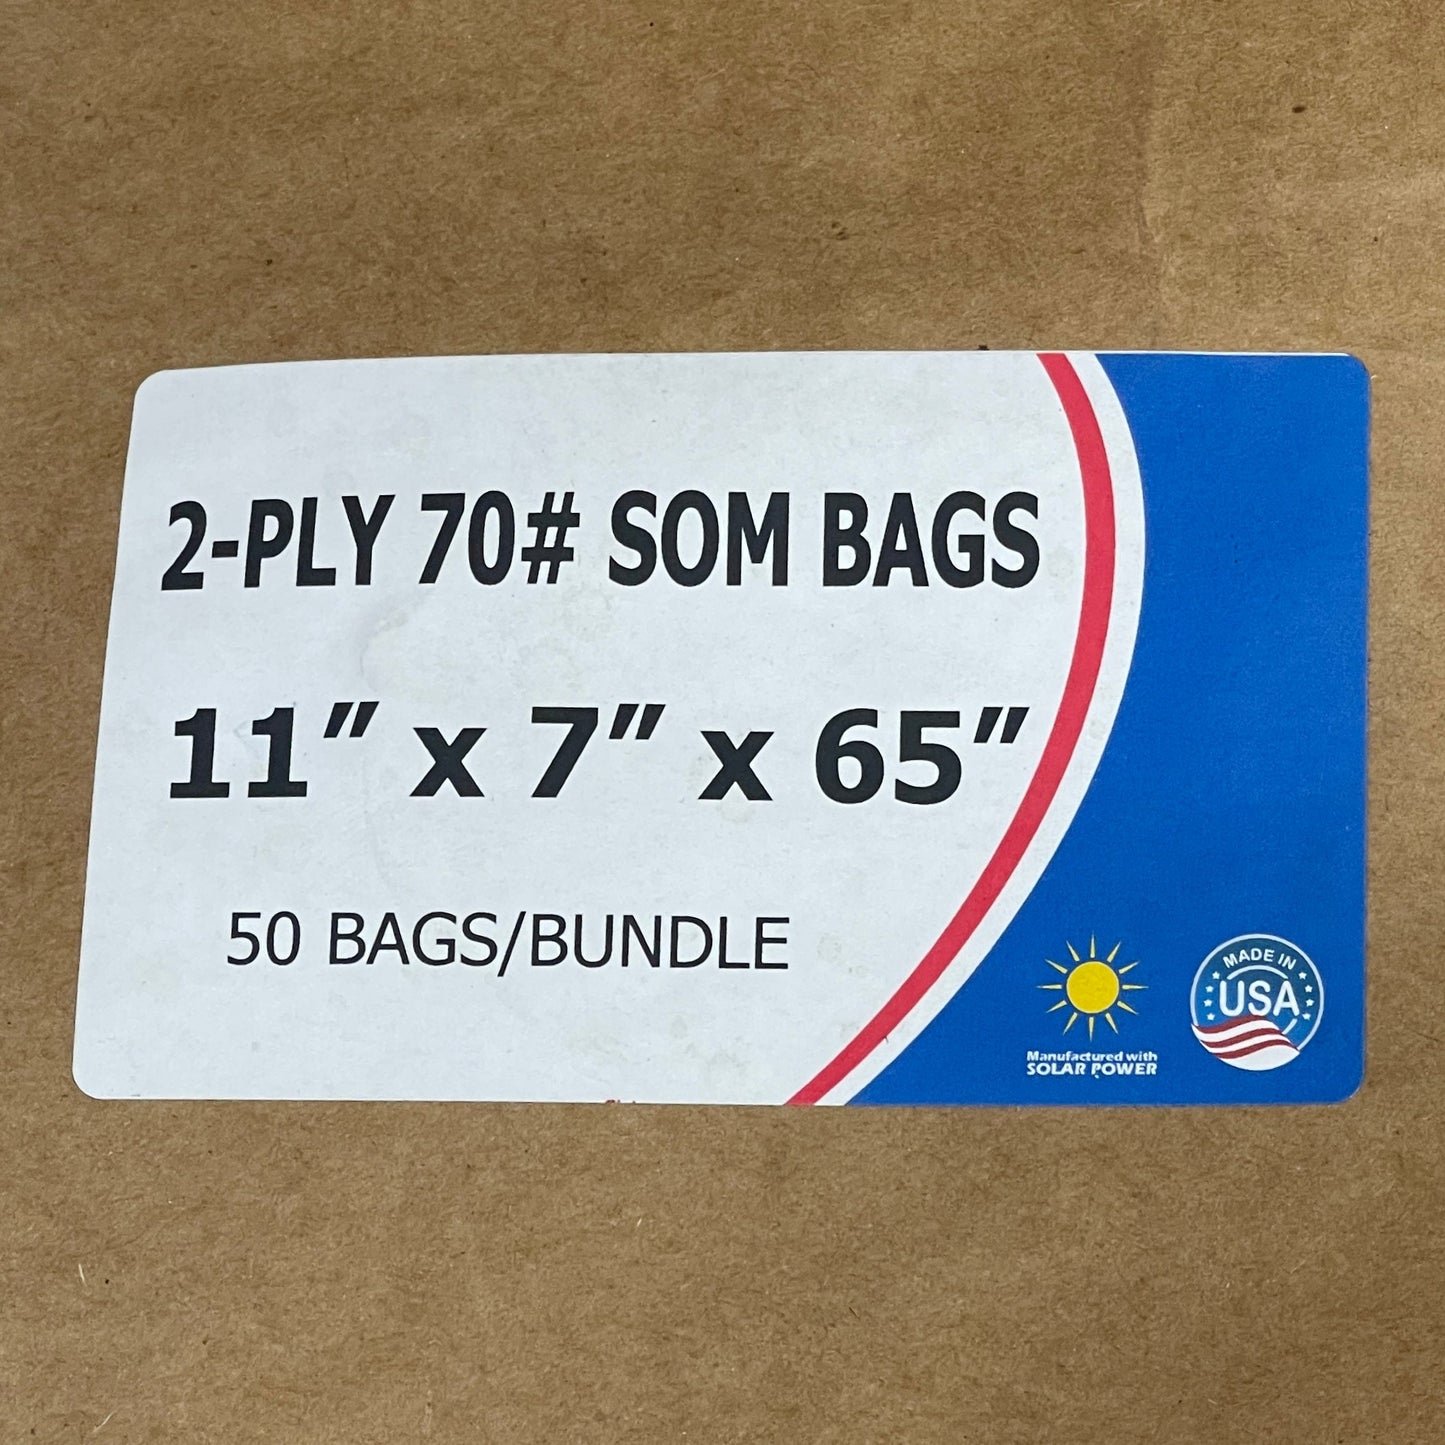 OREN INTERNATIONAL Sewn Open Mouth Bags 50-Pack Bundle 11" x 7" x 65" (New Other)